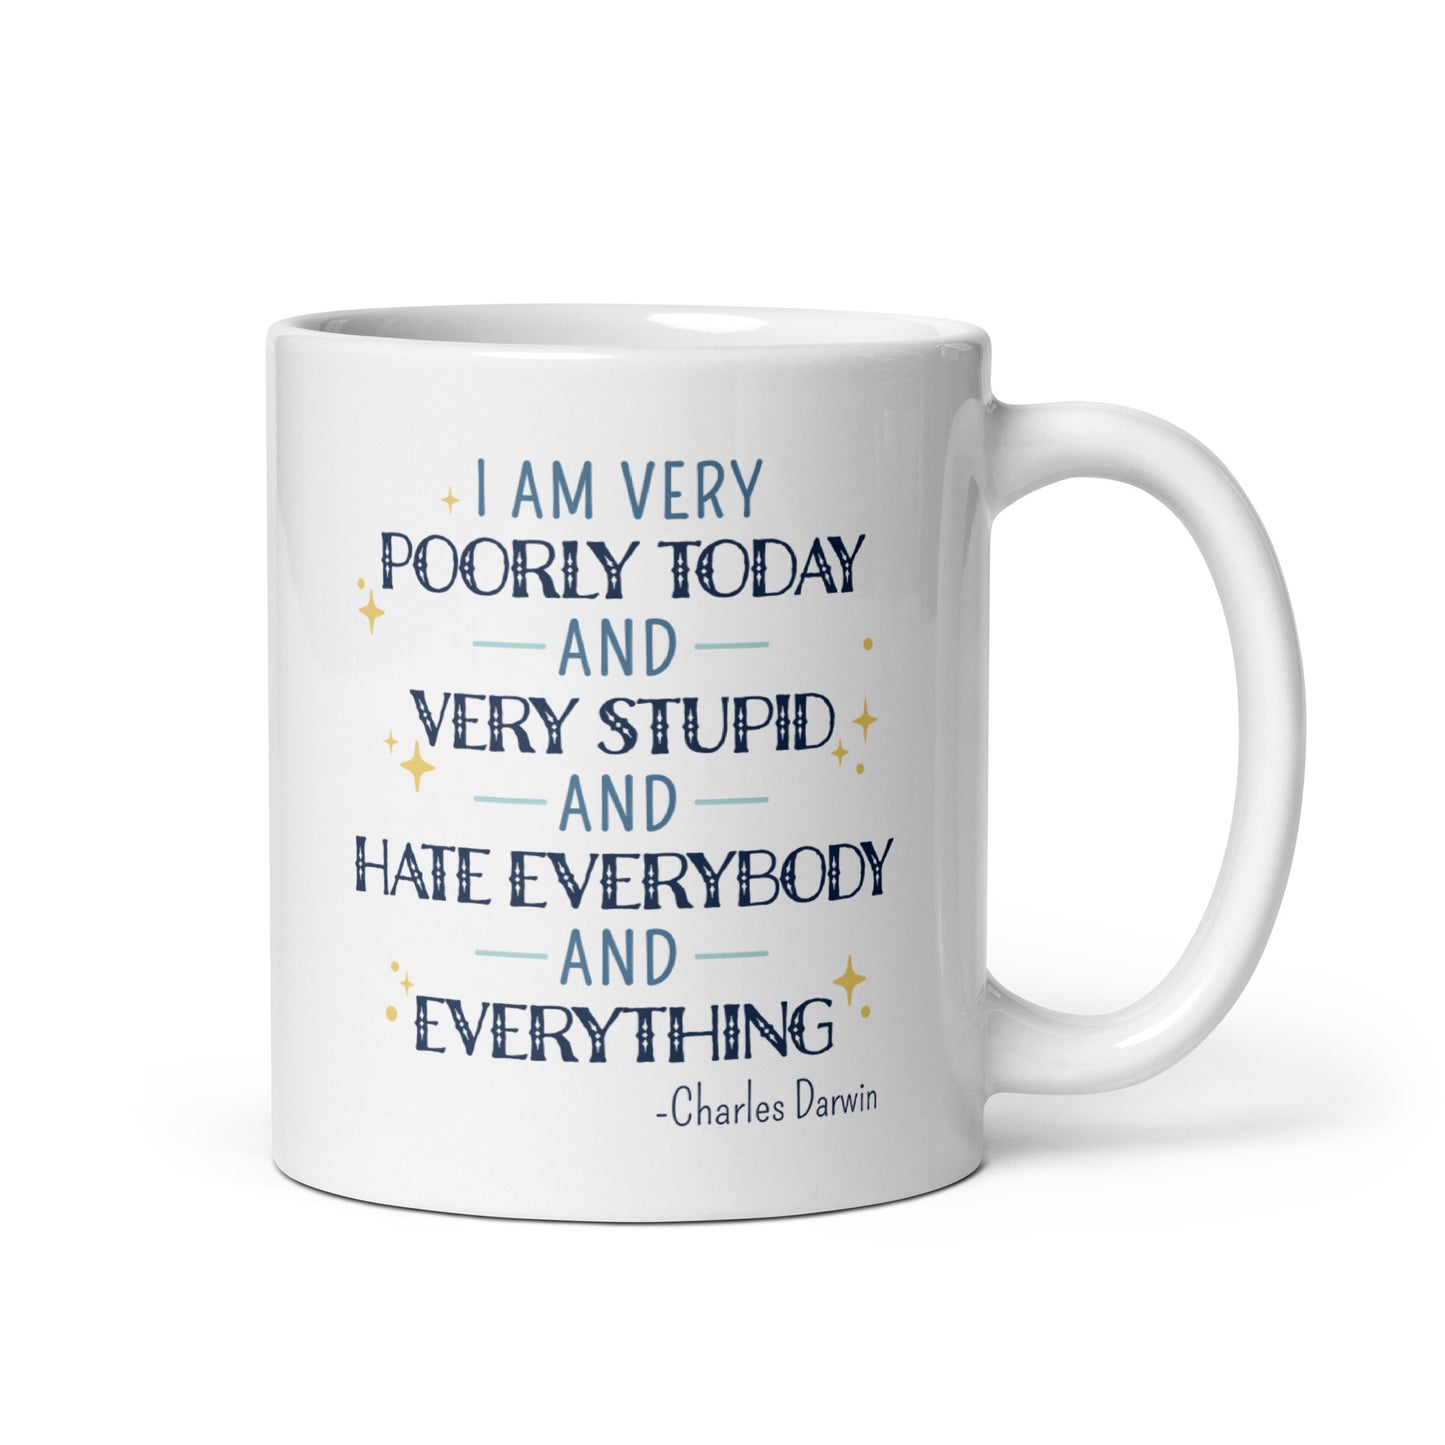 A white ceramic 11 ounce mug with a quote from Charles Darwin in blue text. The quote reads "I am very poorly today and very stupid and hate everybody and everything".